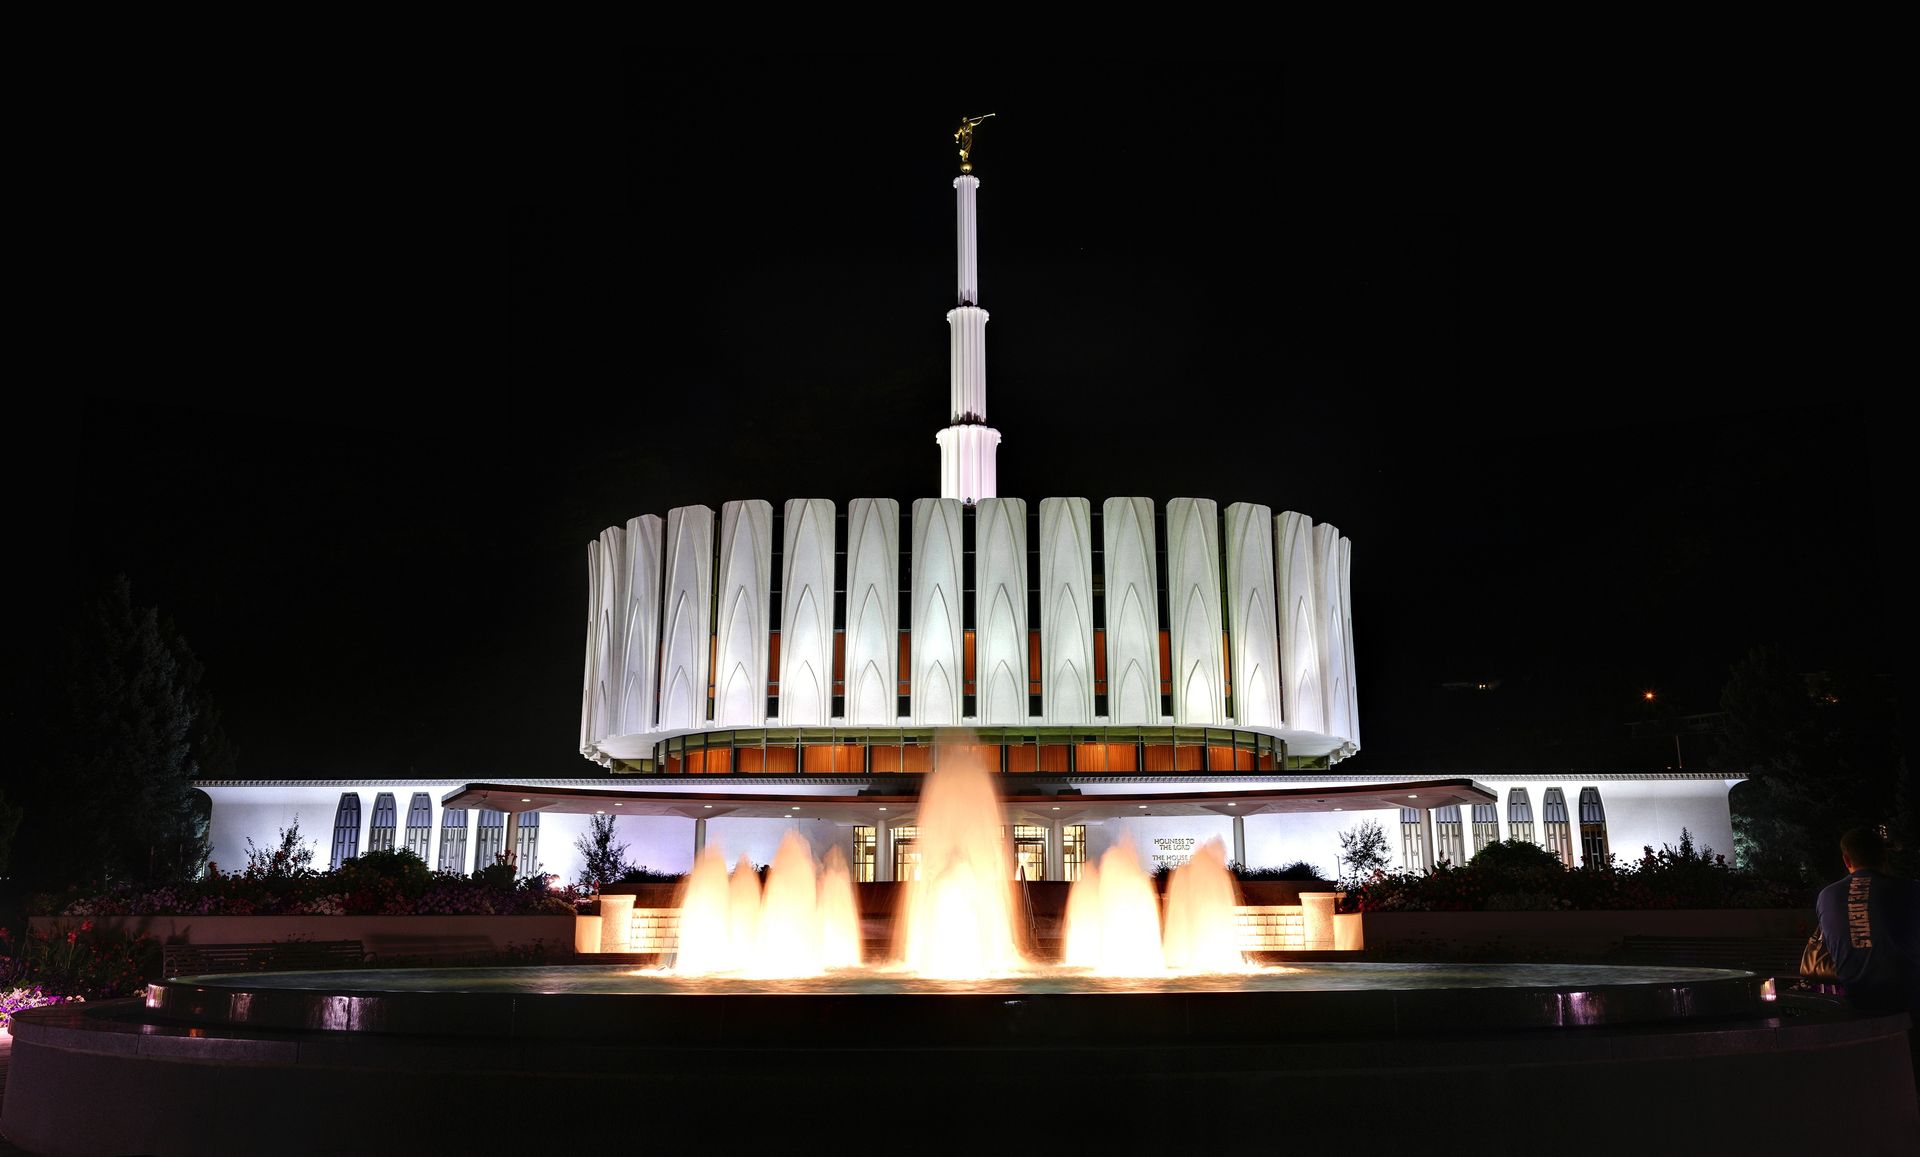 The Provo Utah Temple in the evening, including the fountain and entrance.